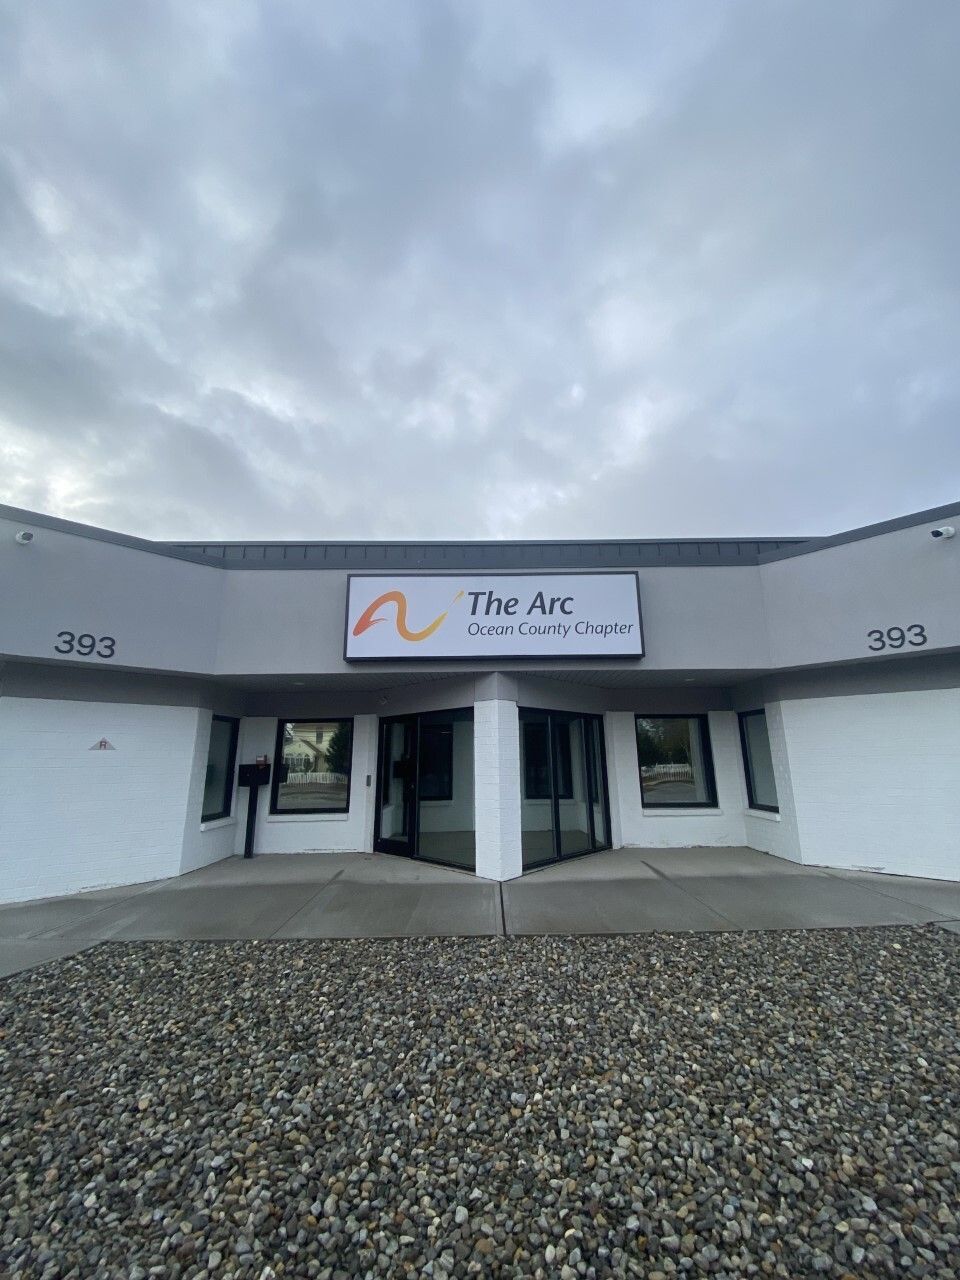 Photo of the front of a building with The Arc logo and the number "393:" 